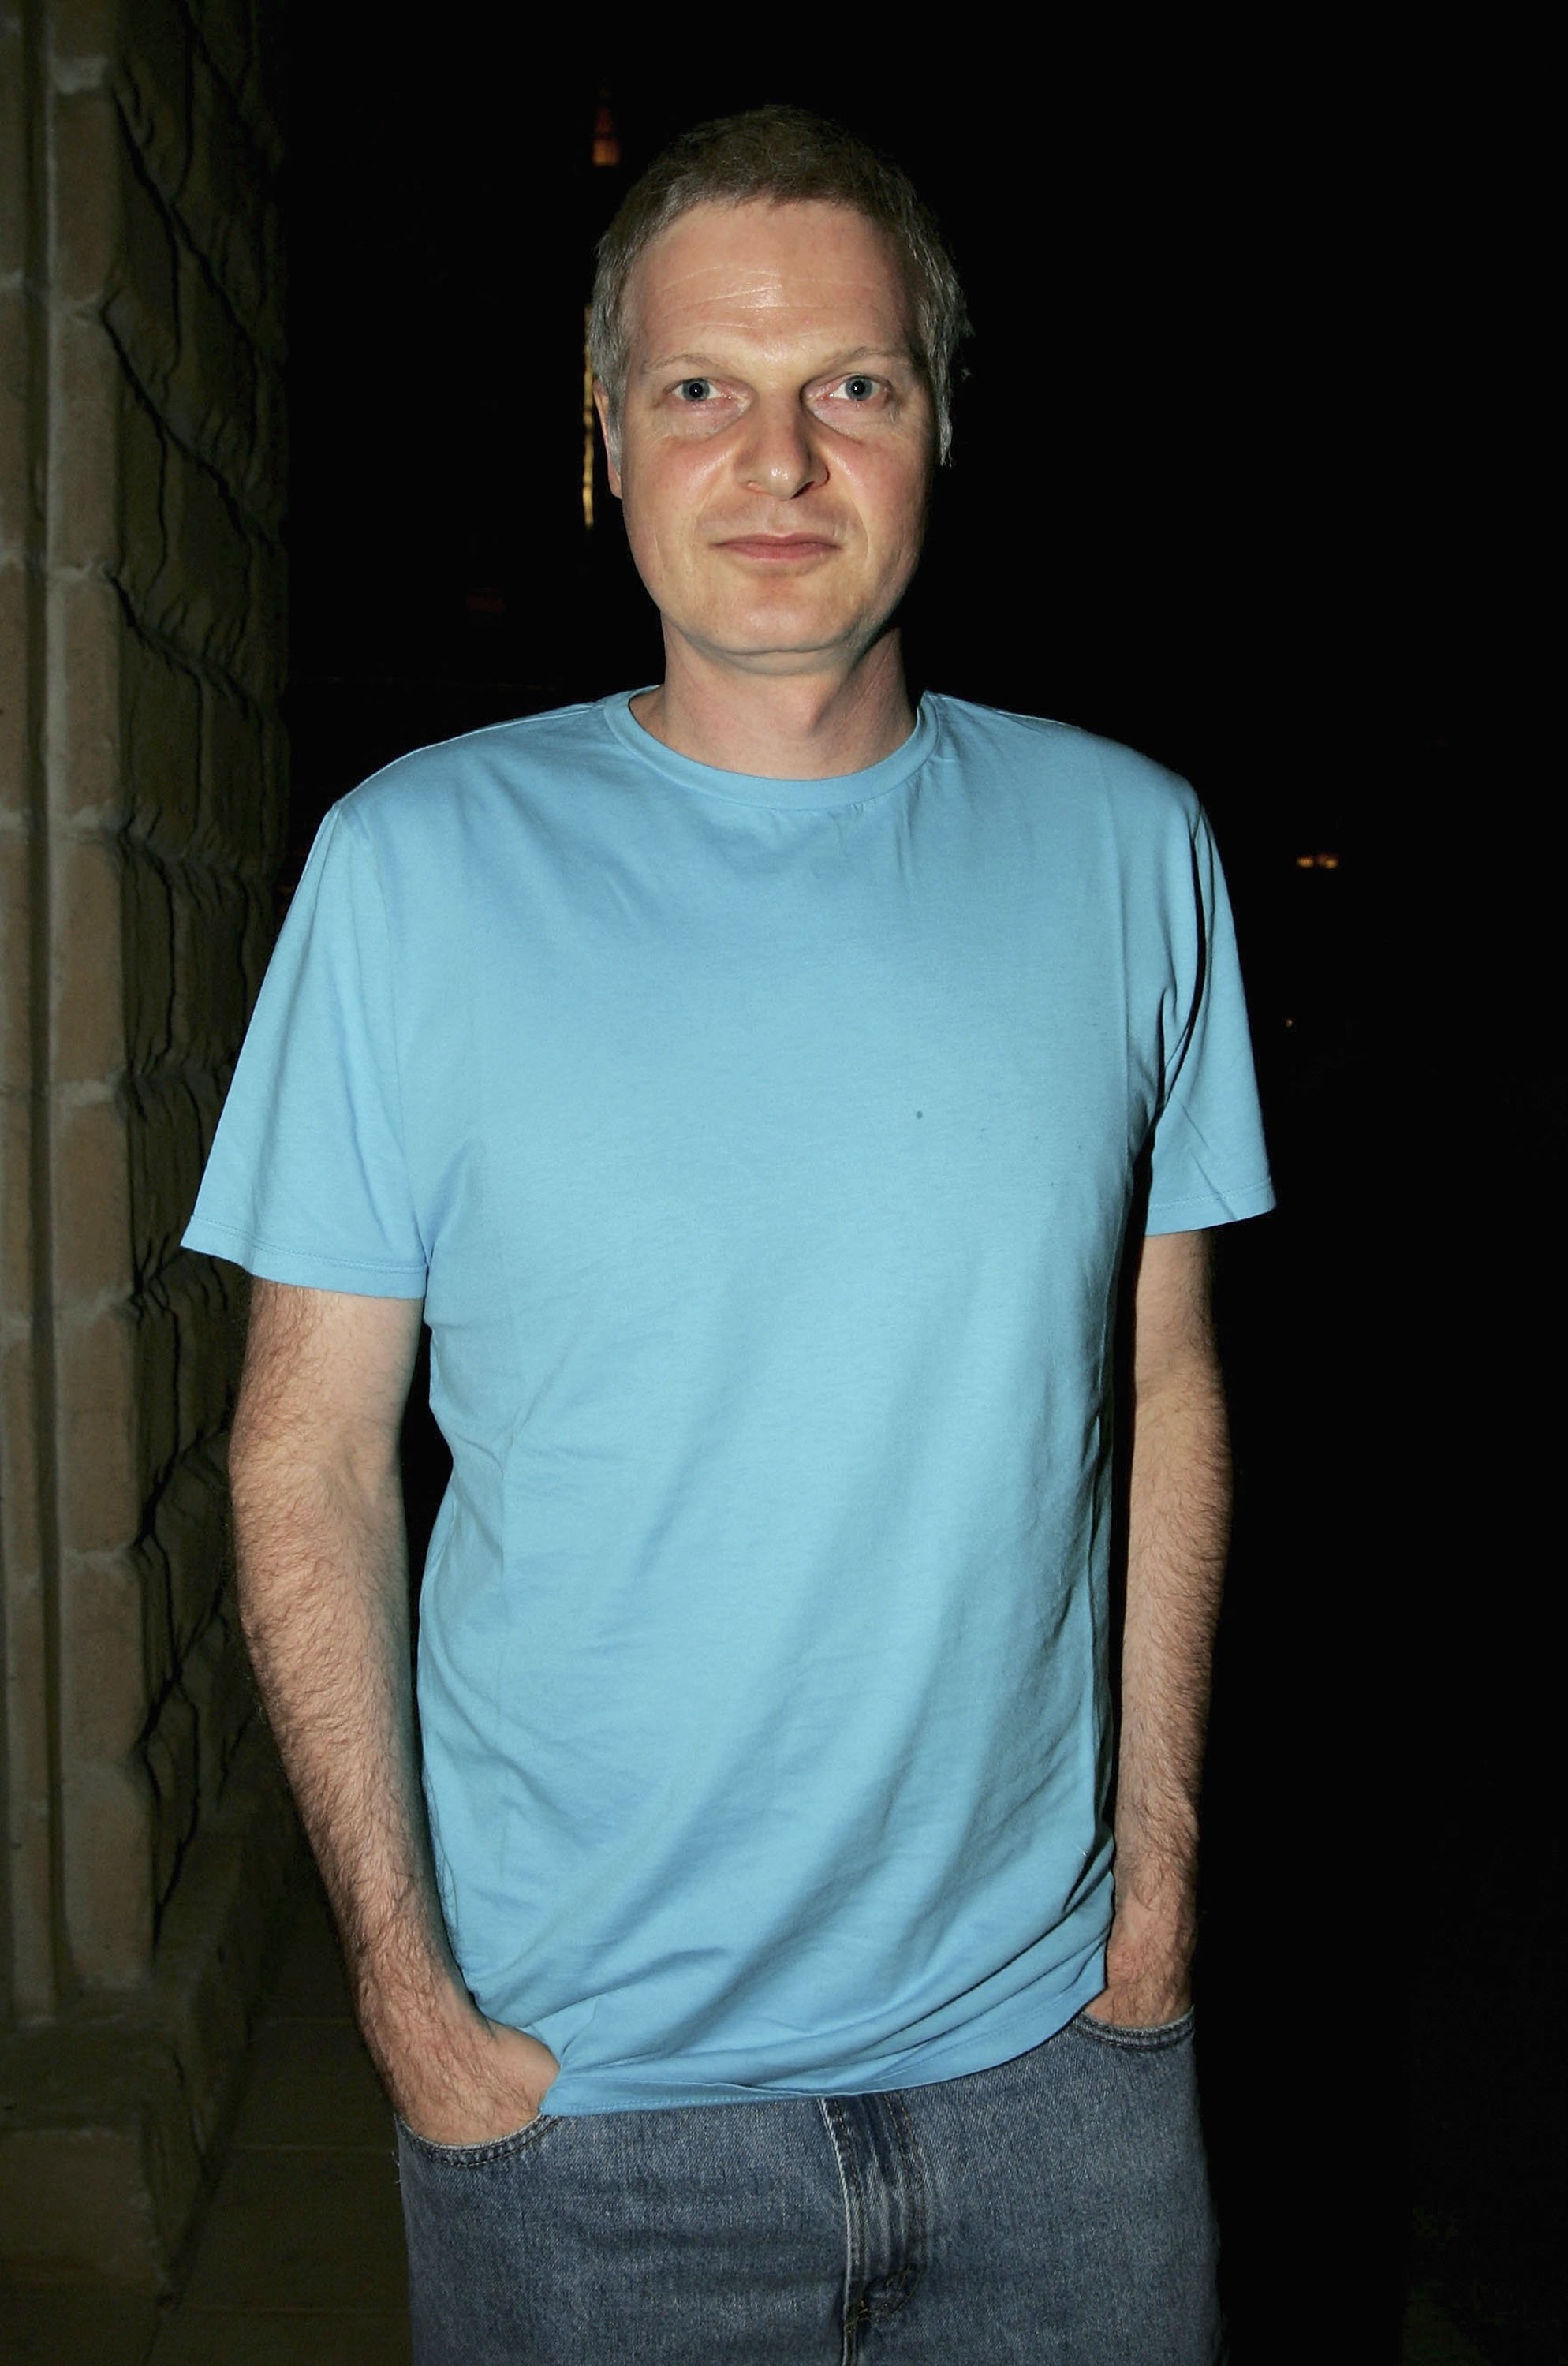 Steve Bing poses for a photo at The Madinat Jumeirah on December 11, 2005, in Dubai, United Arab Emirates. | Source: Getty Images.